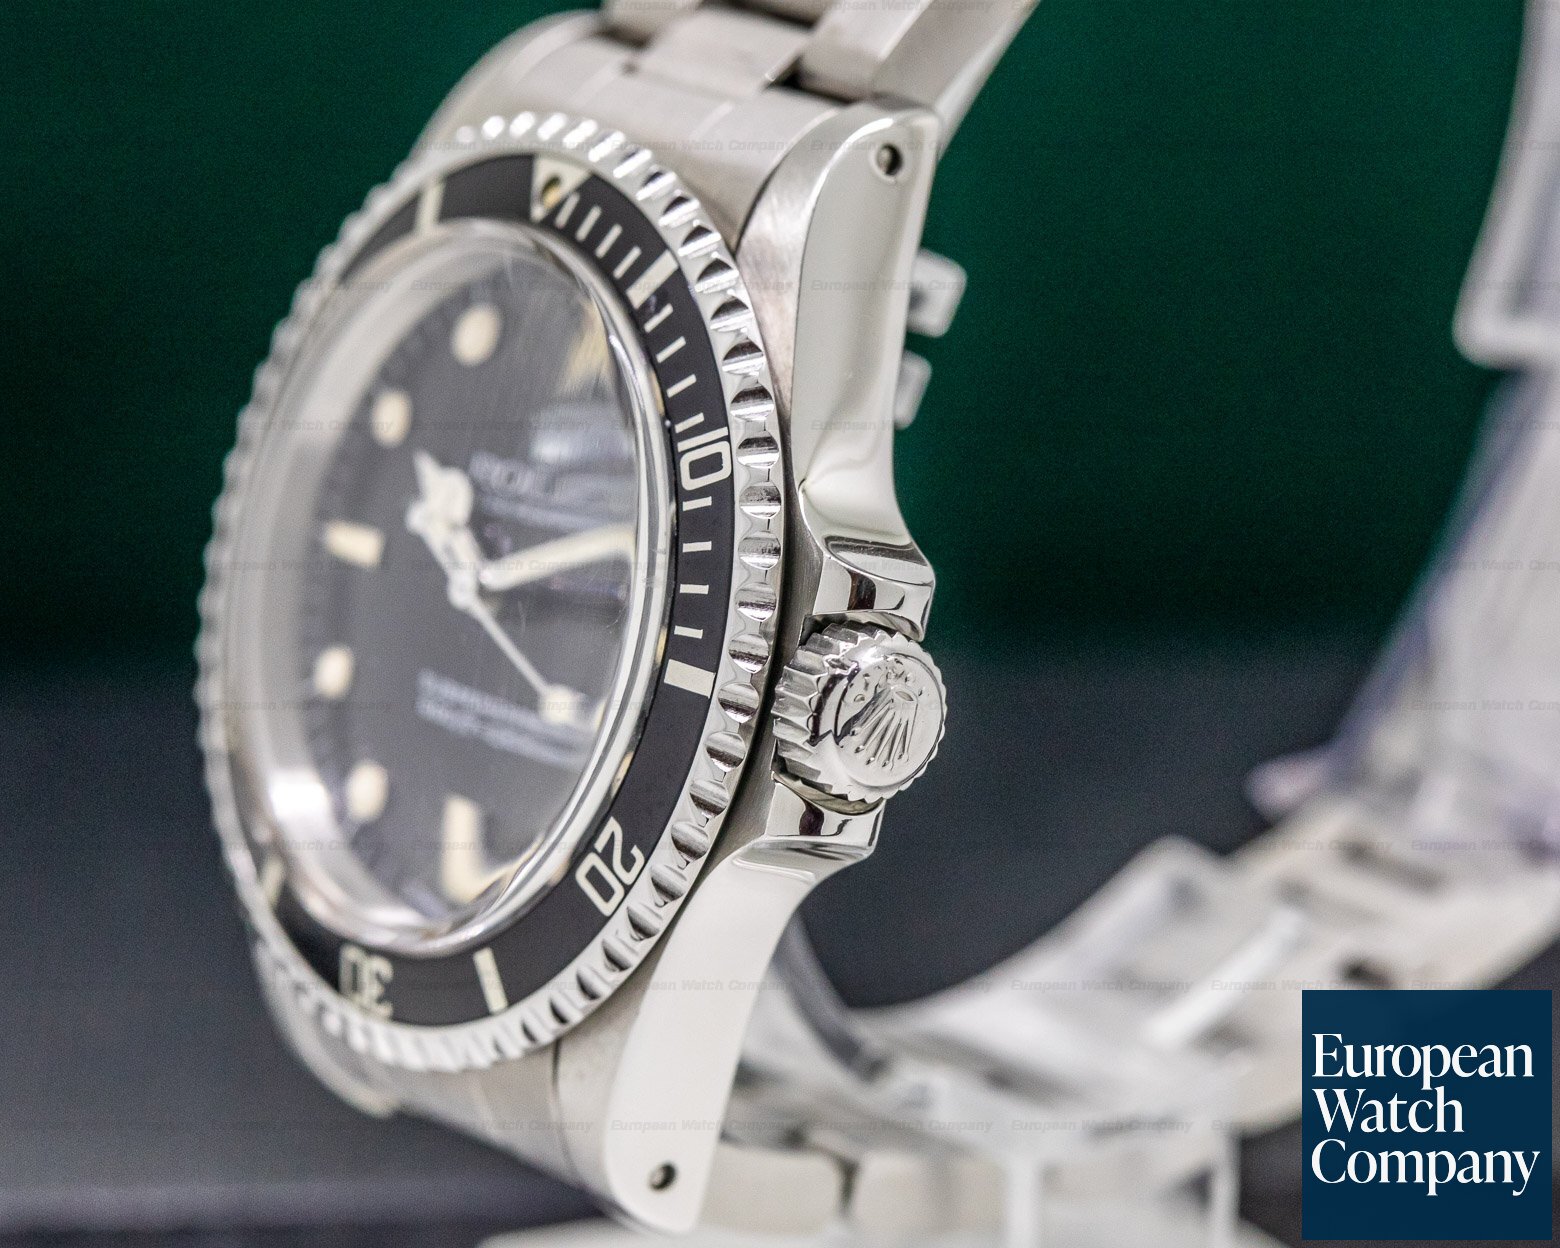 Rolex Transitional Gloss Dial Submariner c. 1988 Ref. 5513